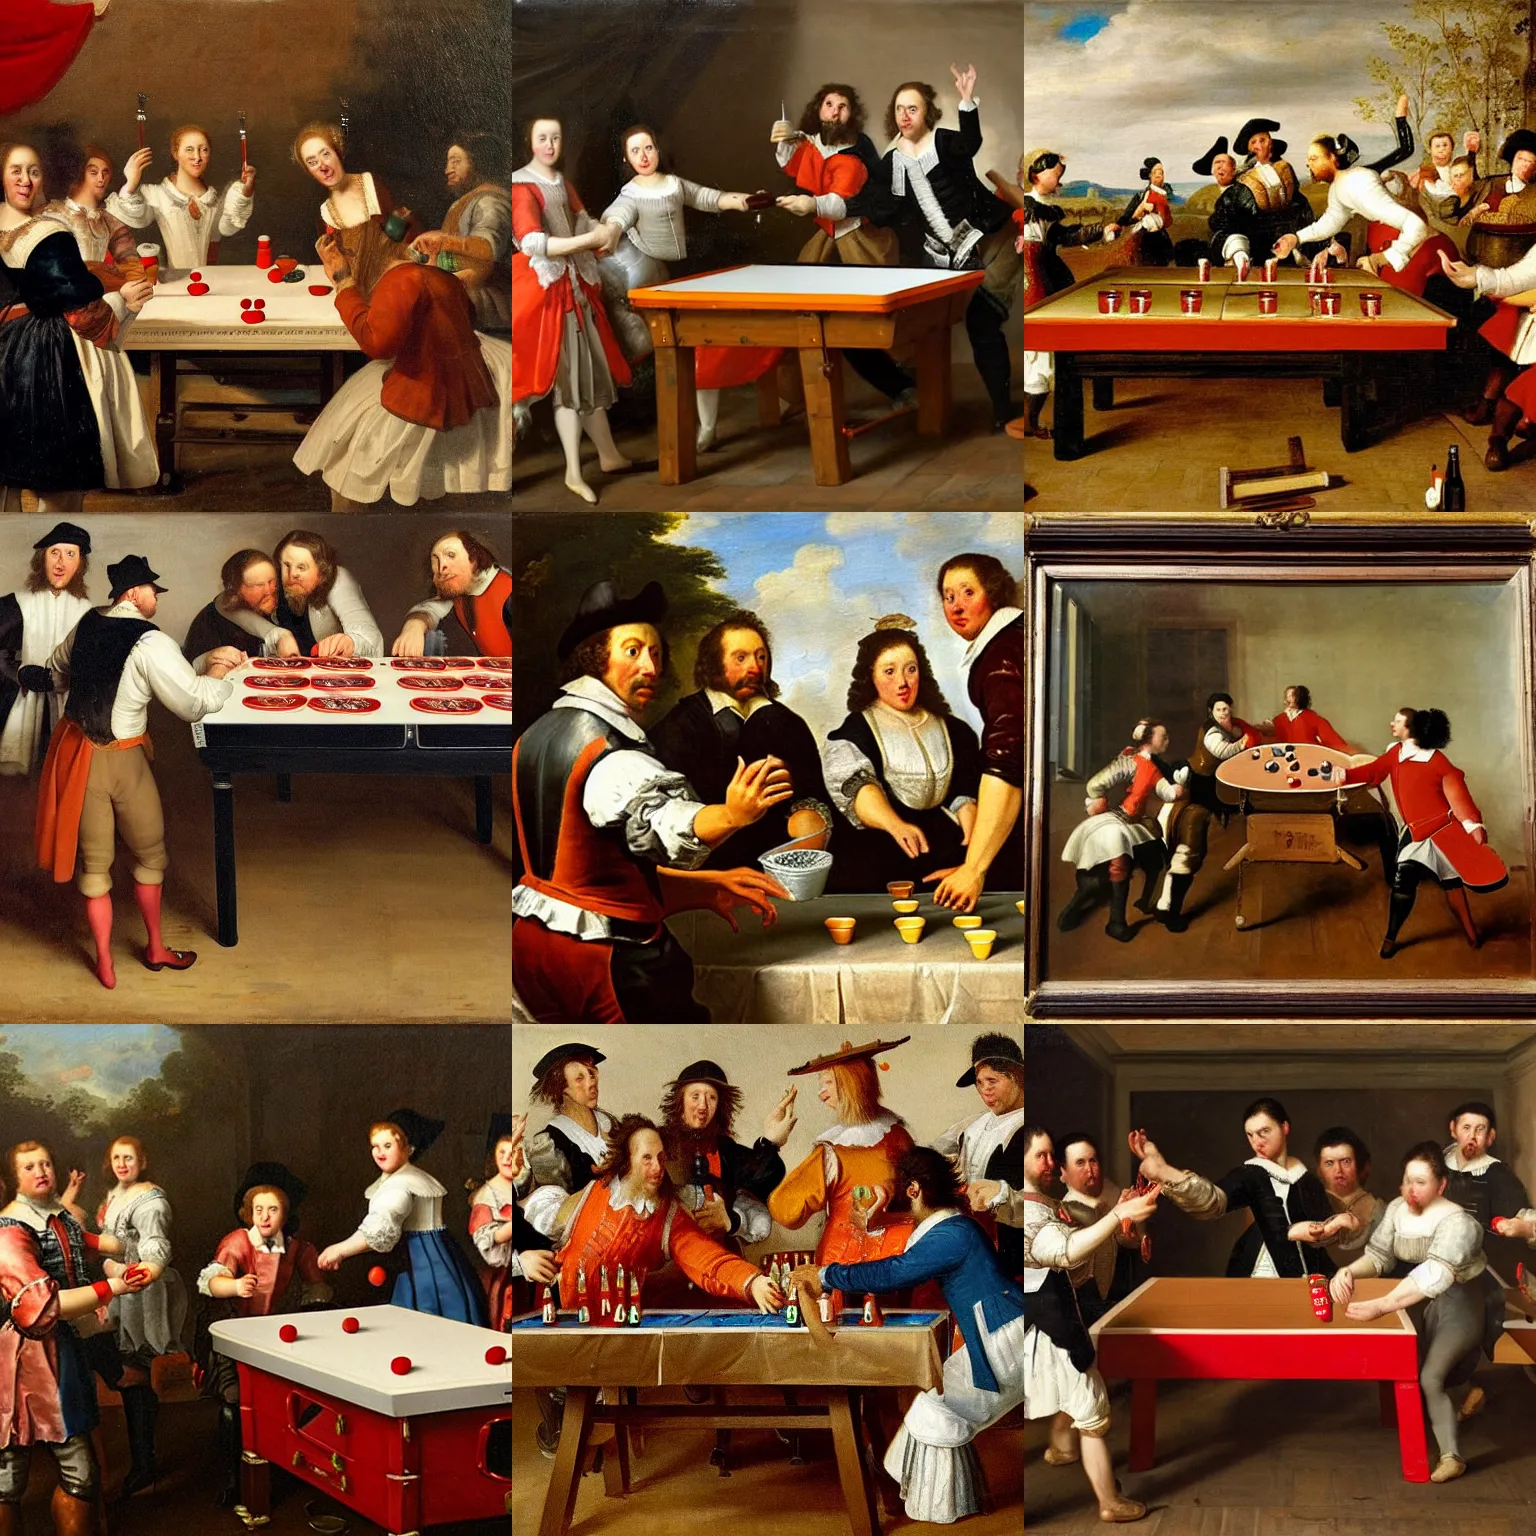 Prompt: Dutch oil painting from 1600s: Students playing beer pong on a table at a party, red solo cups